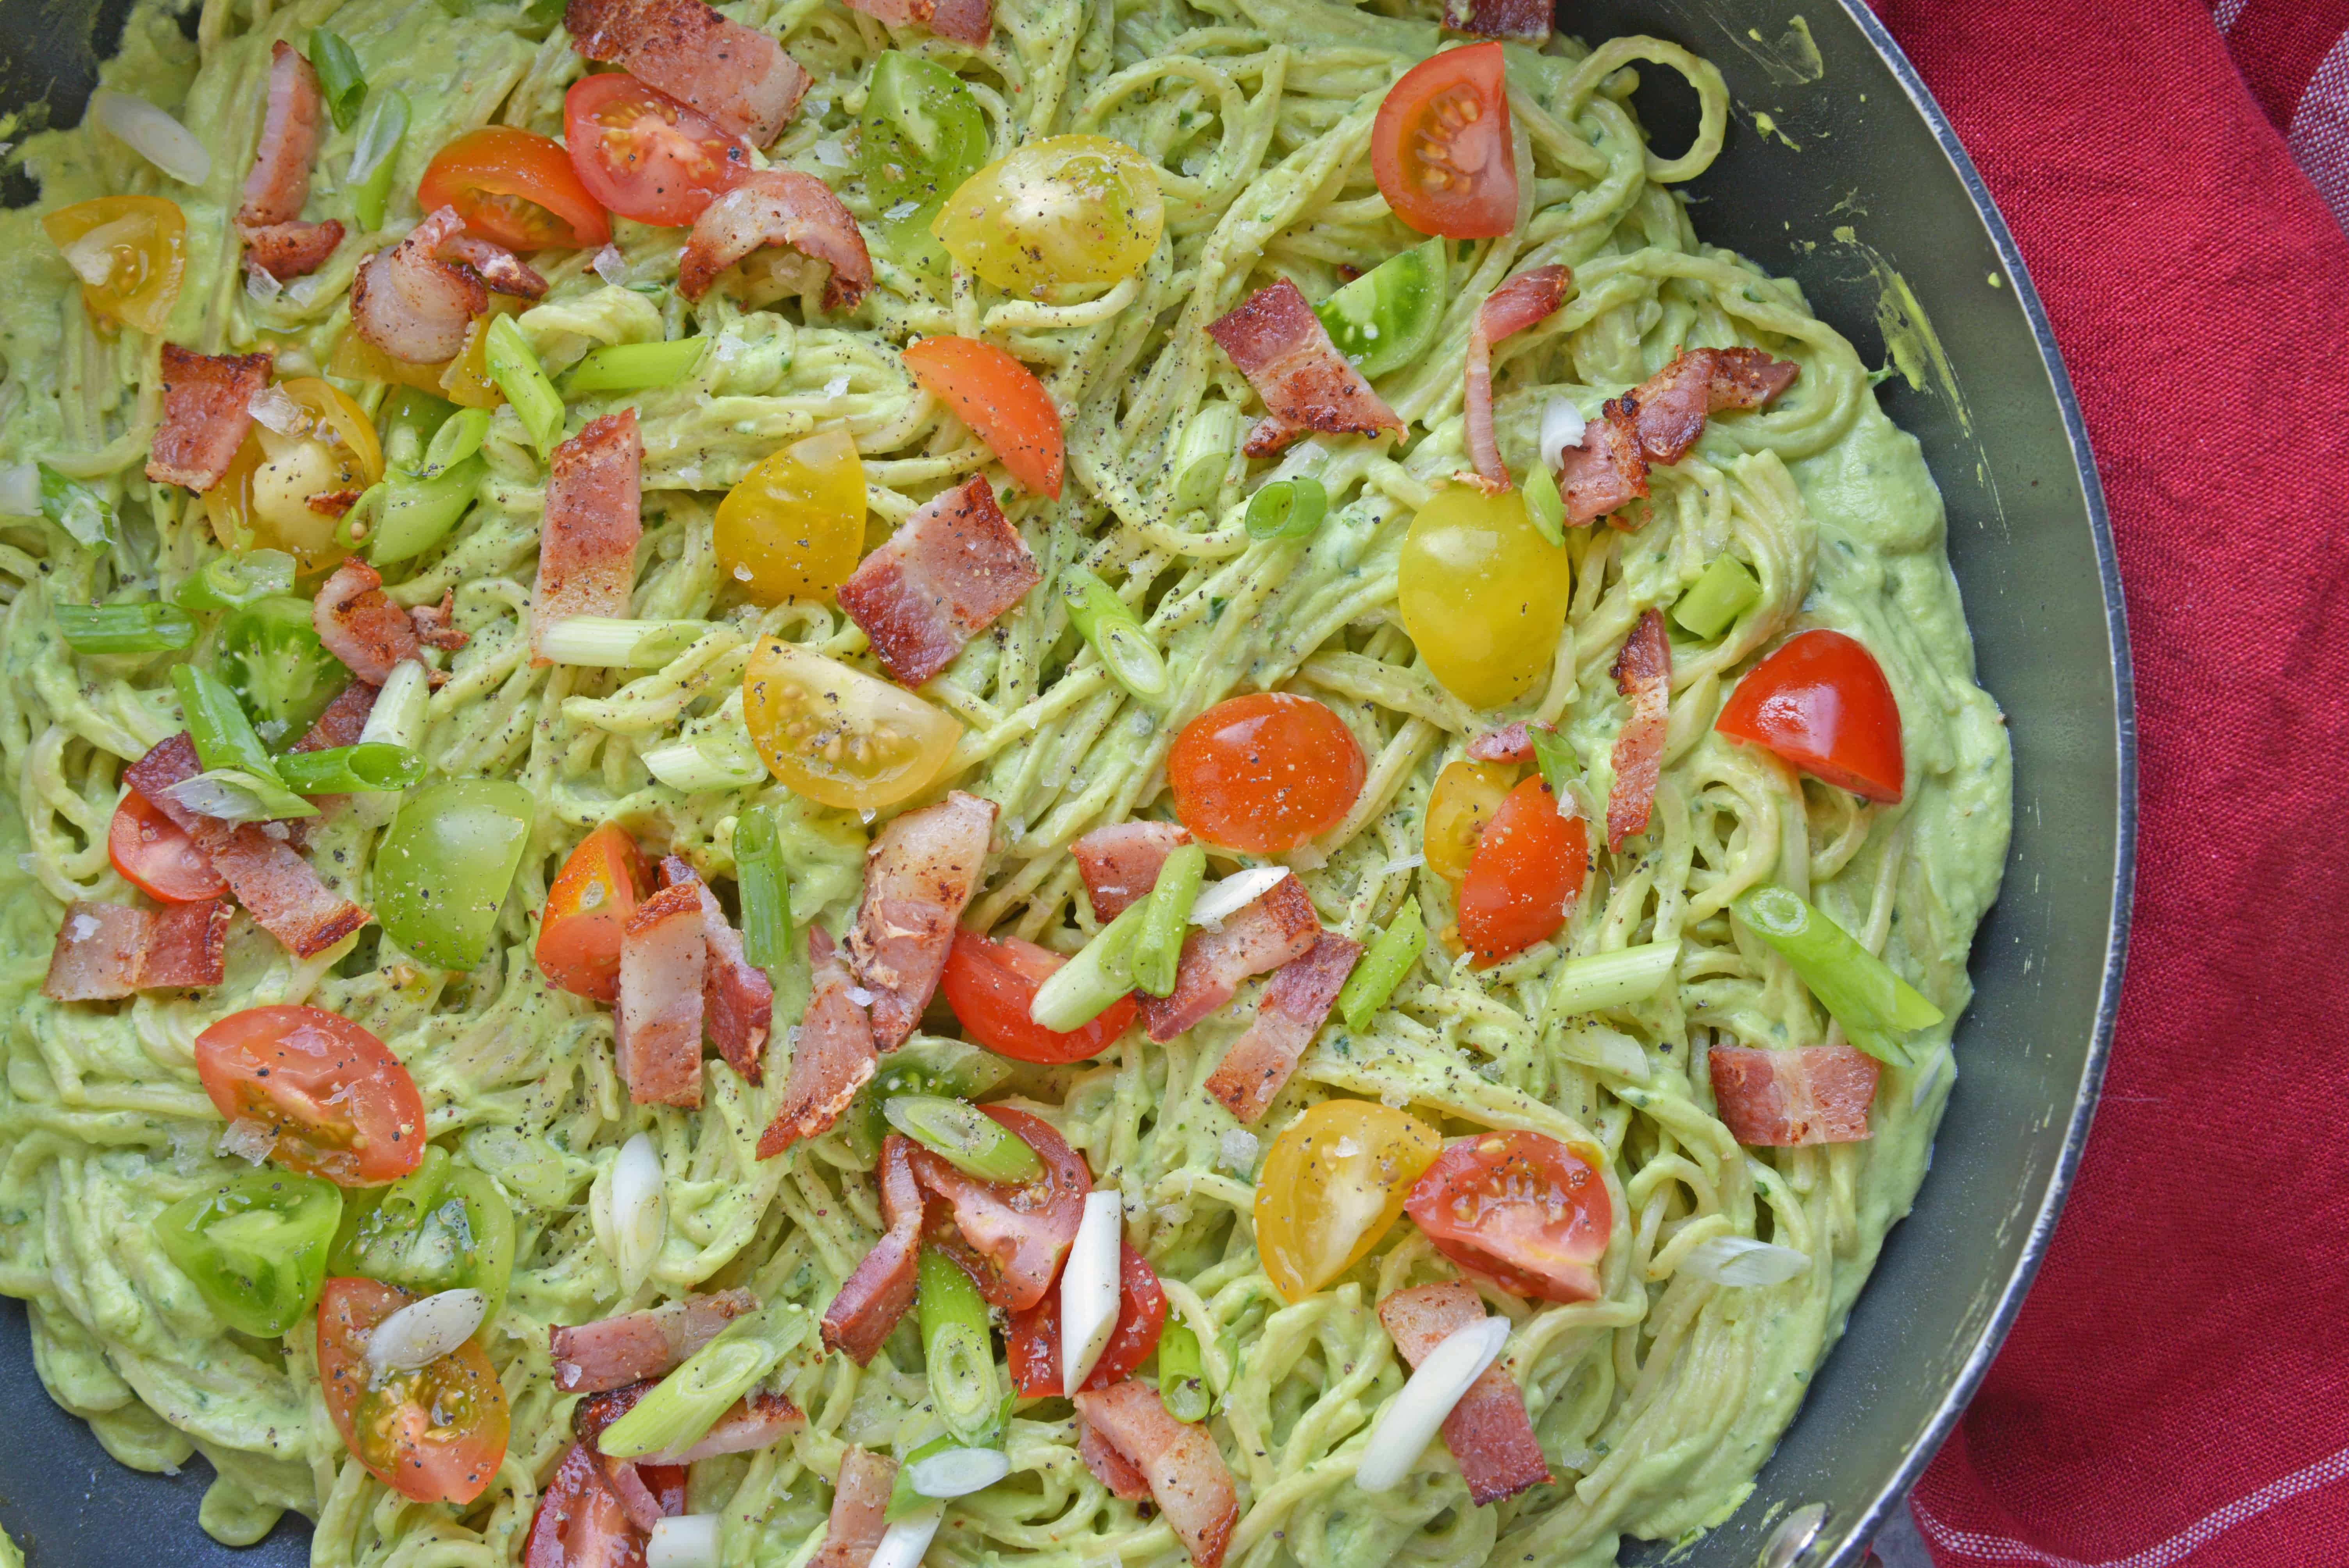 Healthy Creamy Avocado Pasta Sauce is a great alternative to traditional Alfredo sauce. Avocados, thick Greek yogurt, lemon juice, tomatoes and scallions make this wildly popular dish a favorite. Bacon optional! #avocadocreamsauce #creamyavocadopastasauce www.savoryexperiments.com 